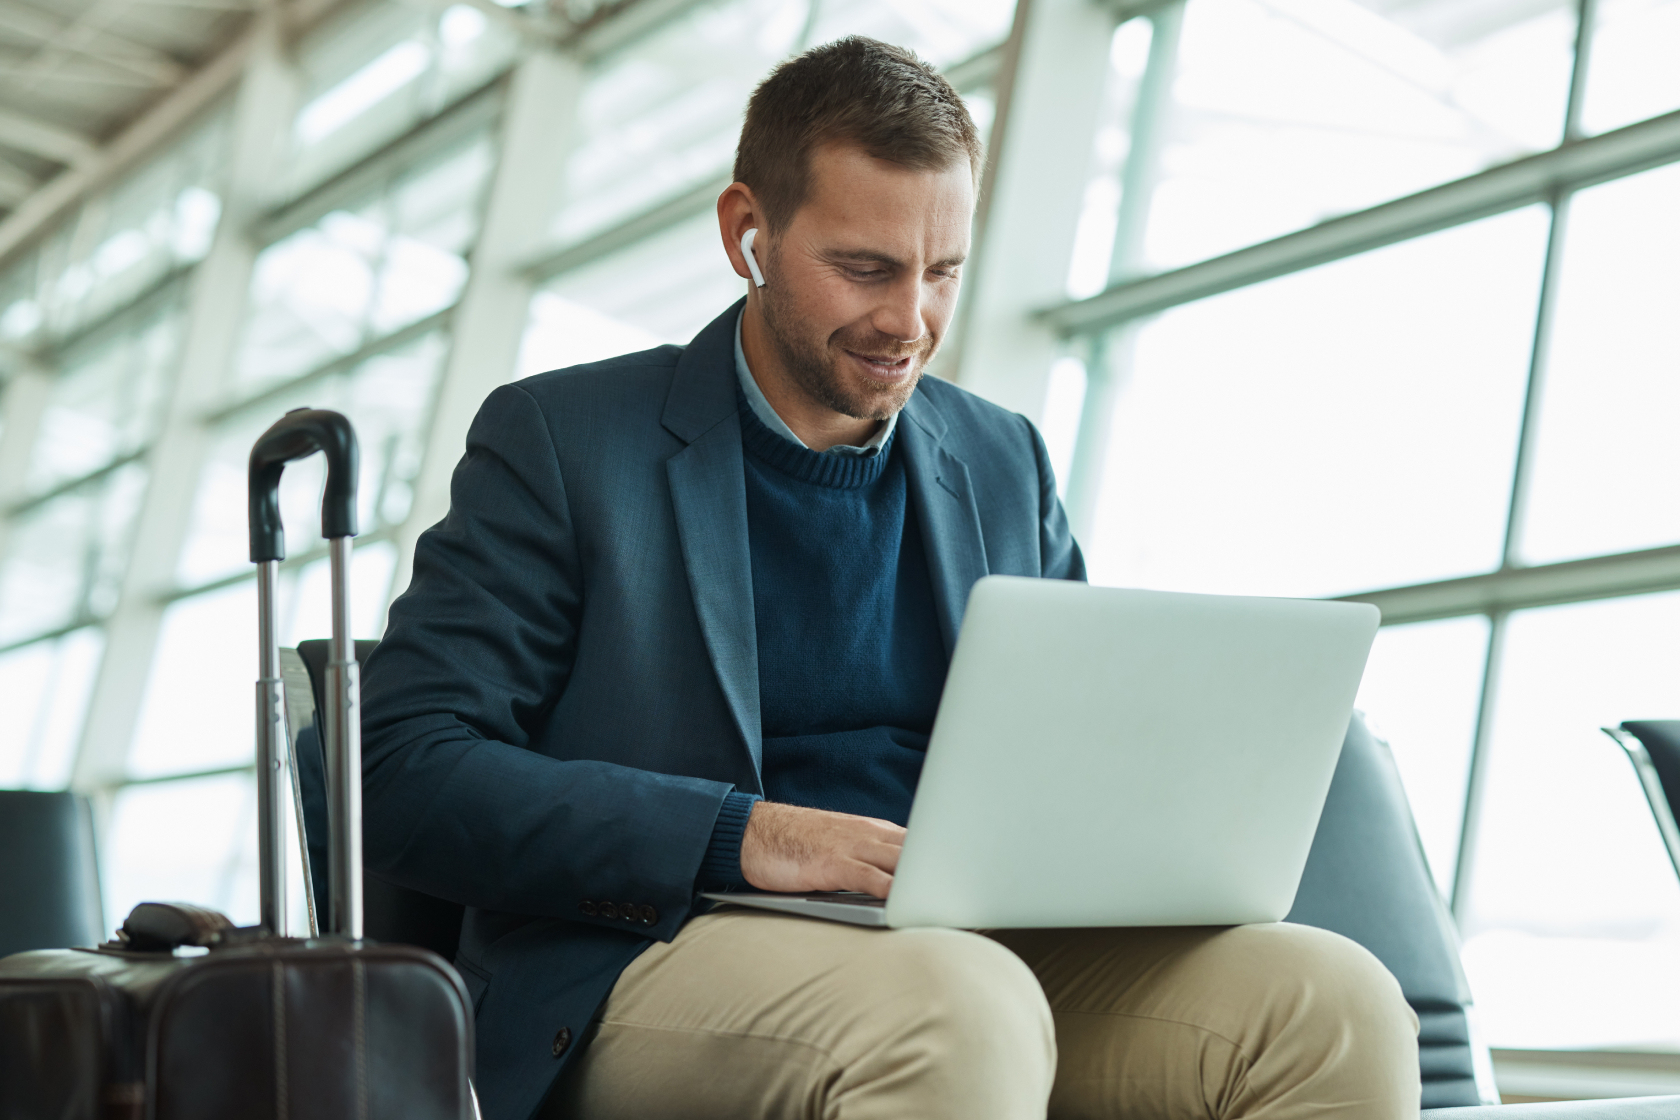 A man works on his laptop in an airport while waiting for his flight to board. In order to legally deduct business travel, specific criteria must be met.